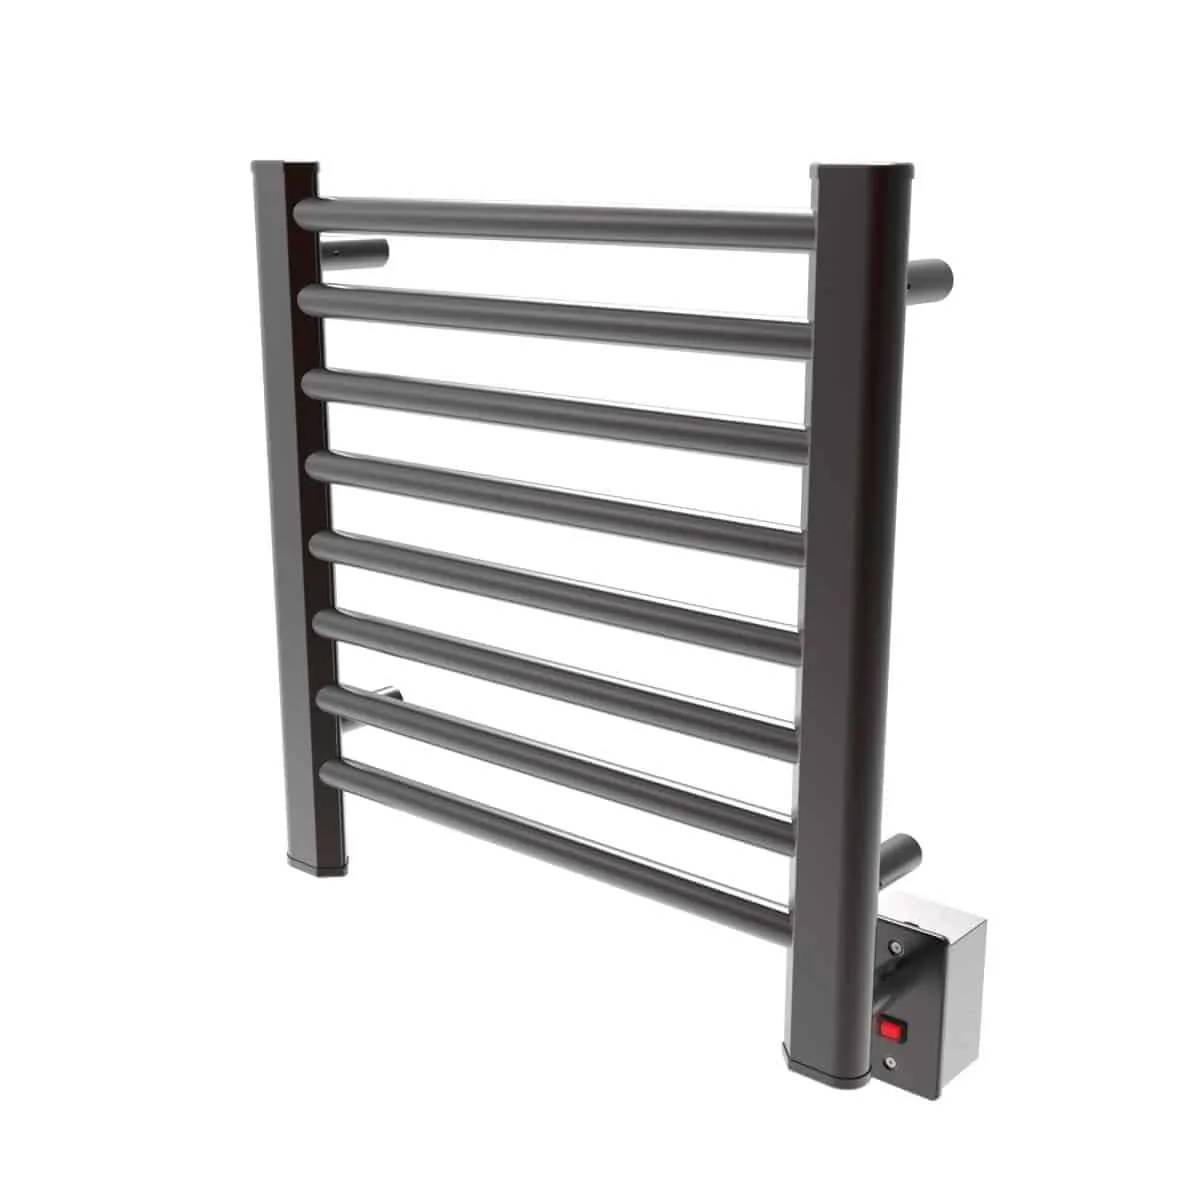 Amba S2121O Model Bar Hardwired Towel Warmer - Oil Rubbed Bronze - Click Image to Close